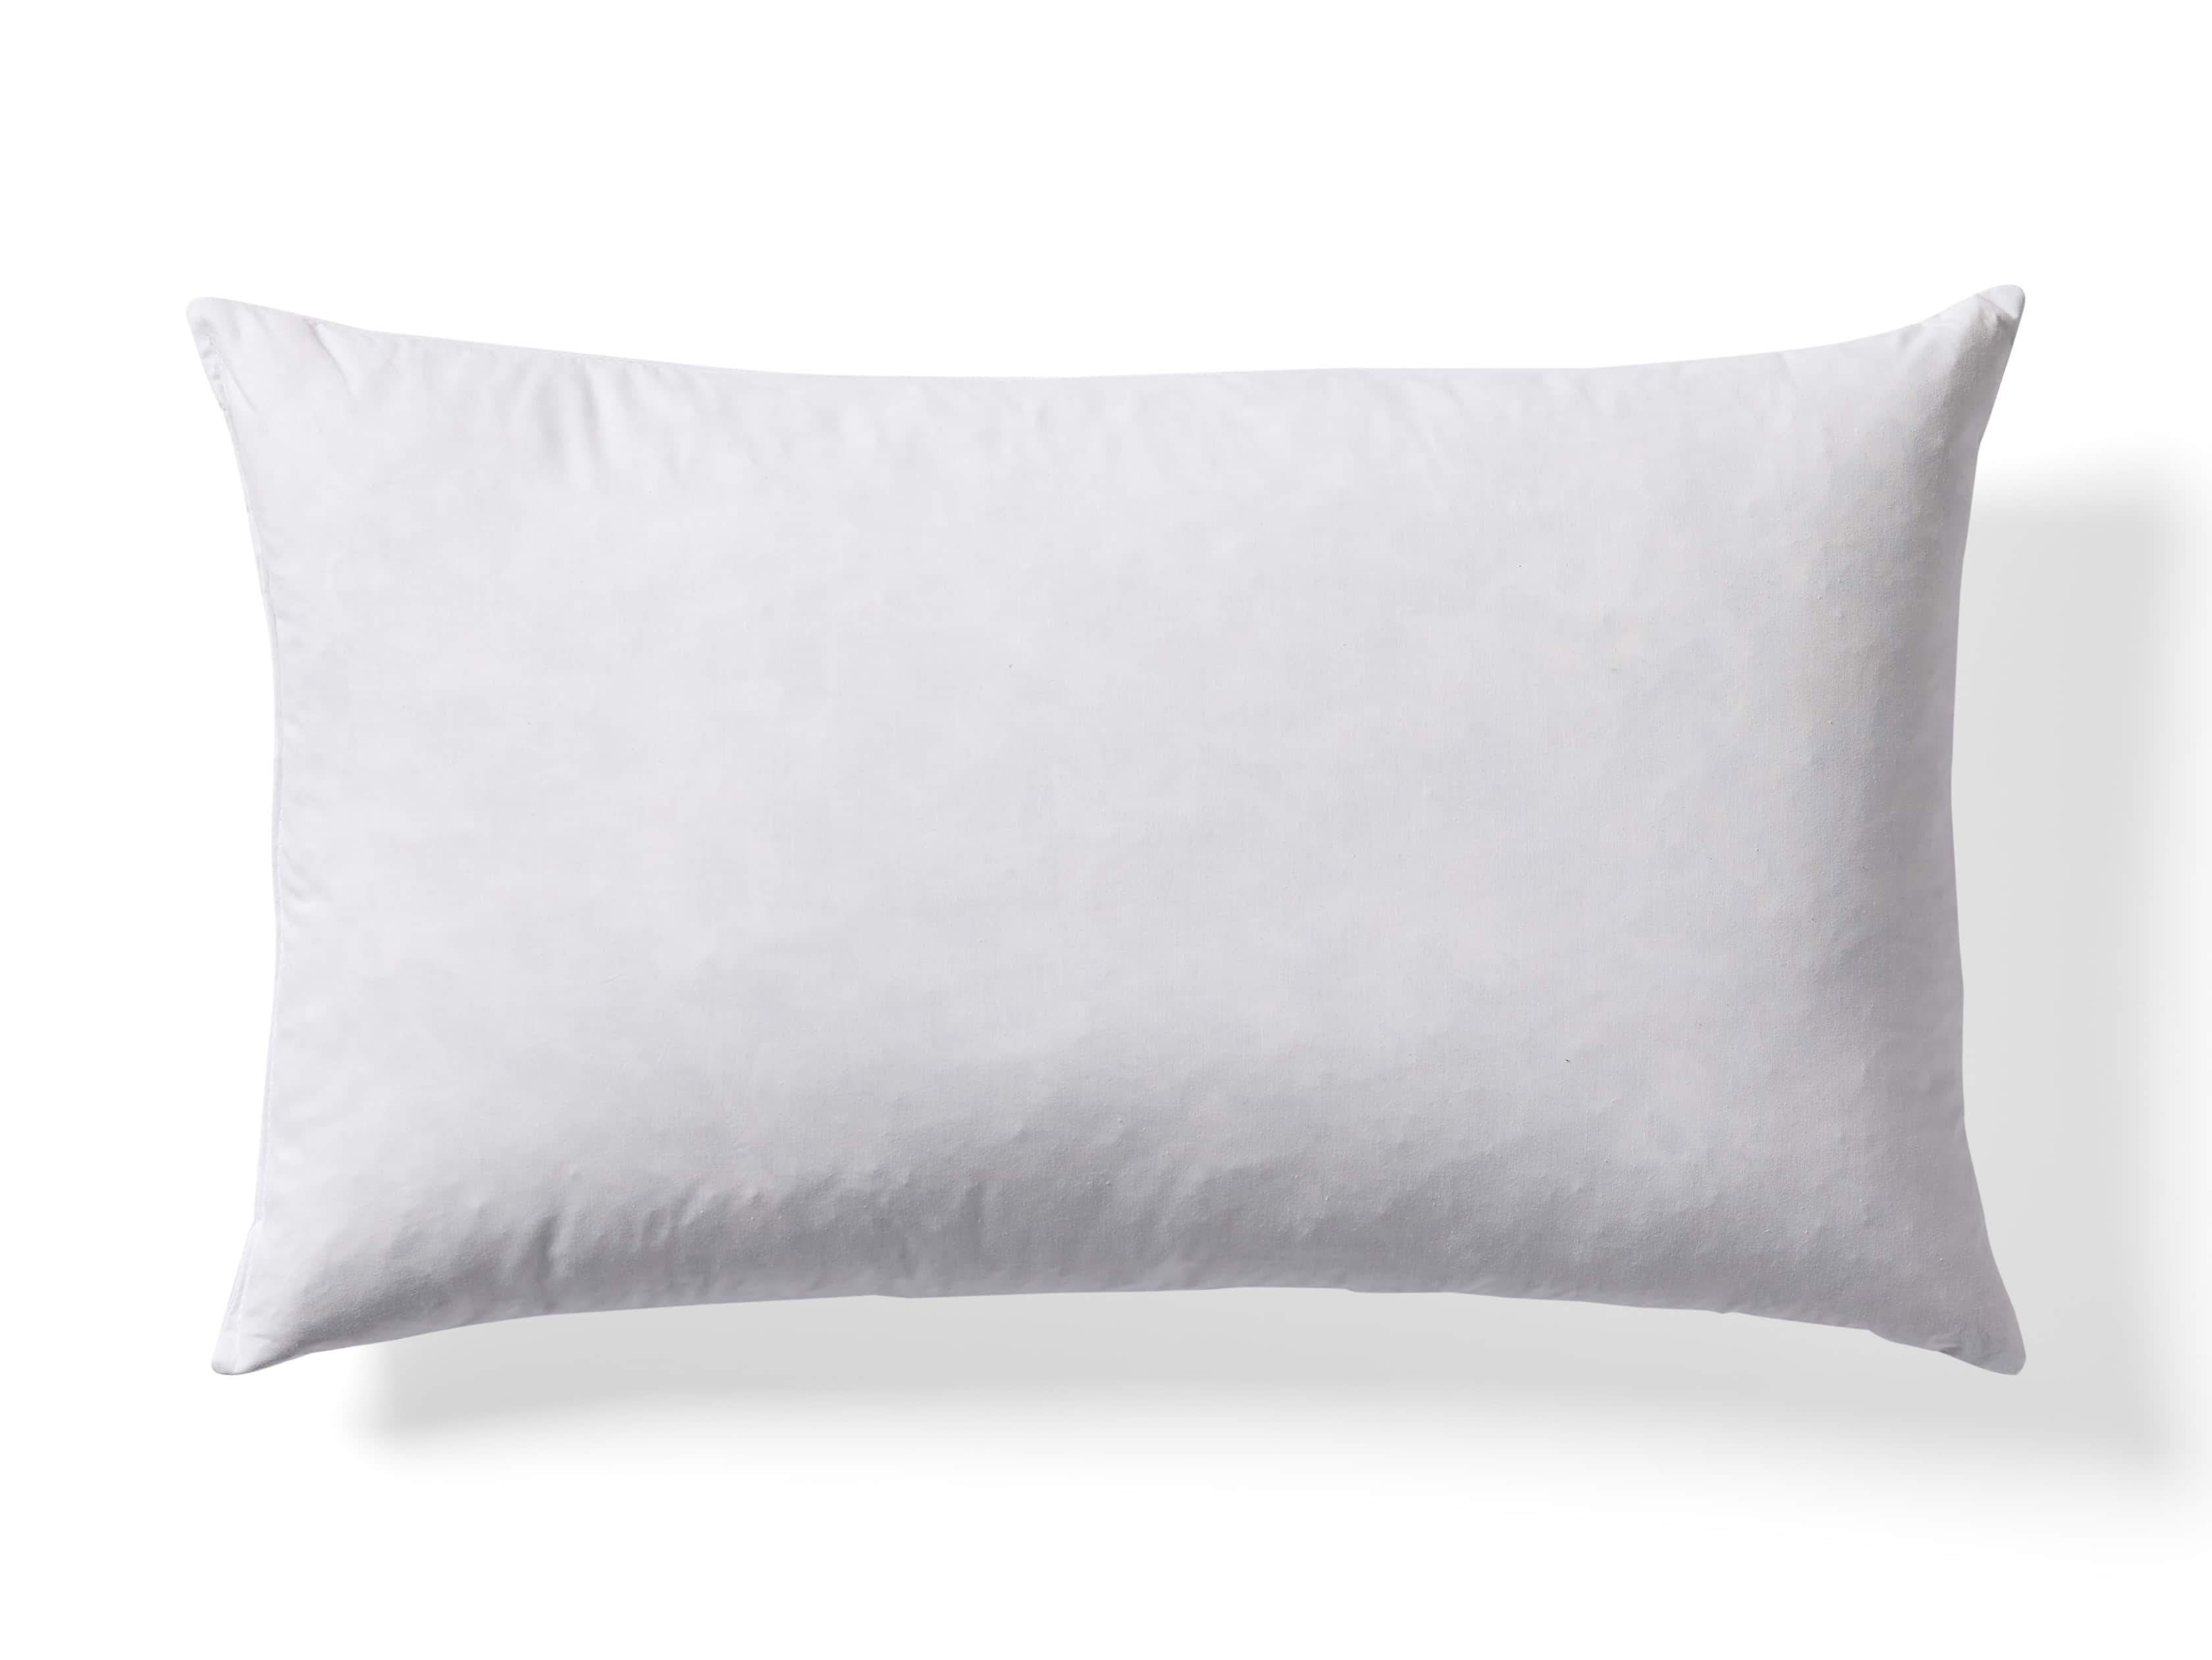 Pillow Core For Pillow Stuffing, Decorative Pillows For Bed